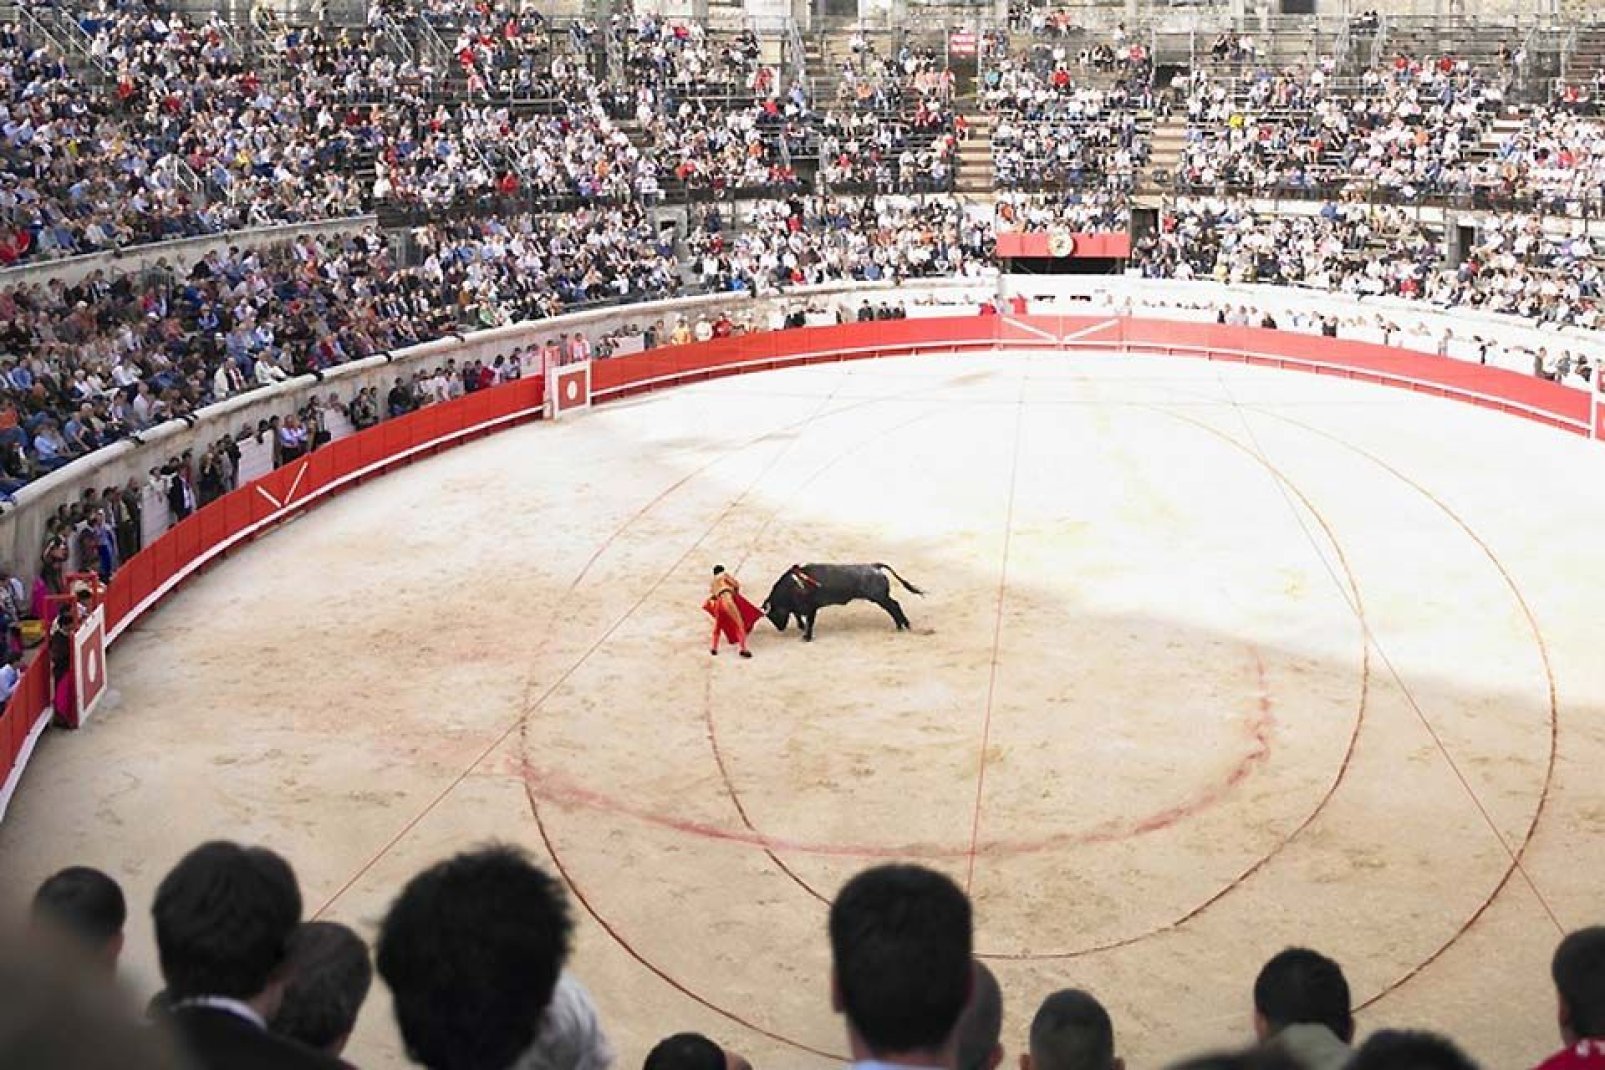 Bullfighting is a veritable institution in the city of Nîmes. Fights are regularly held in the city arena.